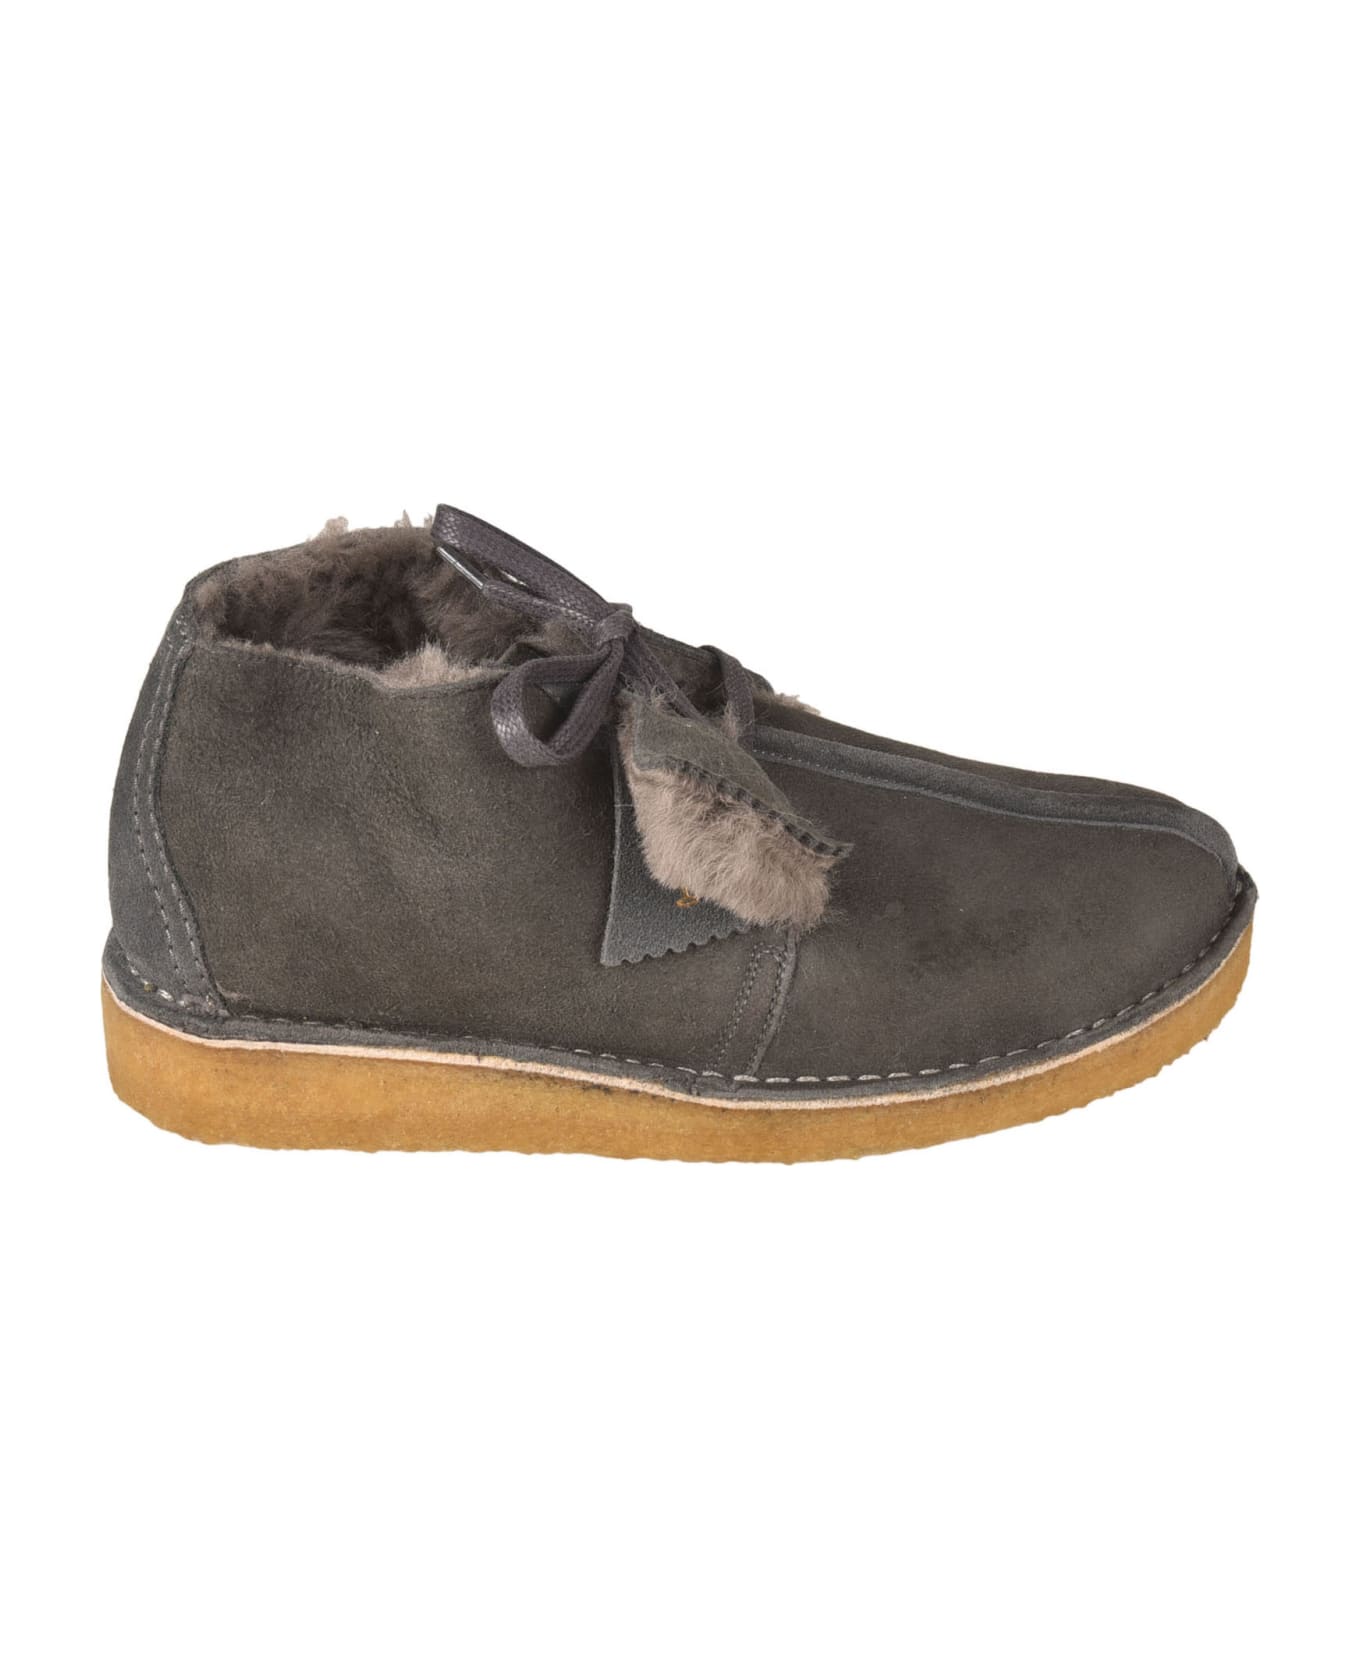 Clarks Furred Inside Boots - Grey